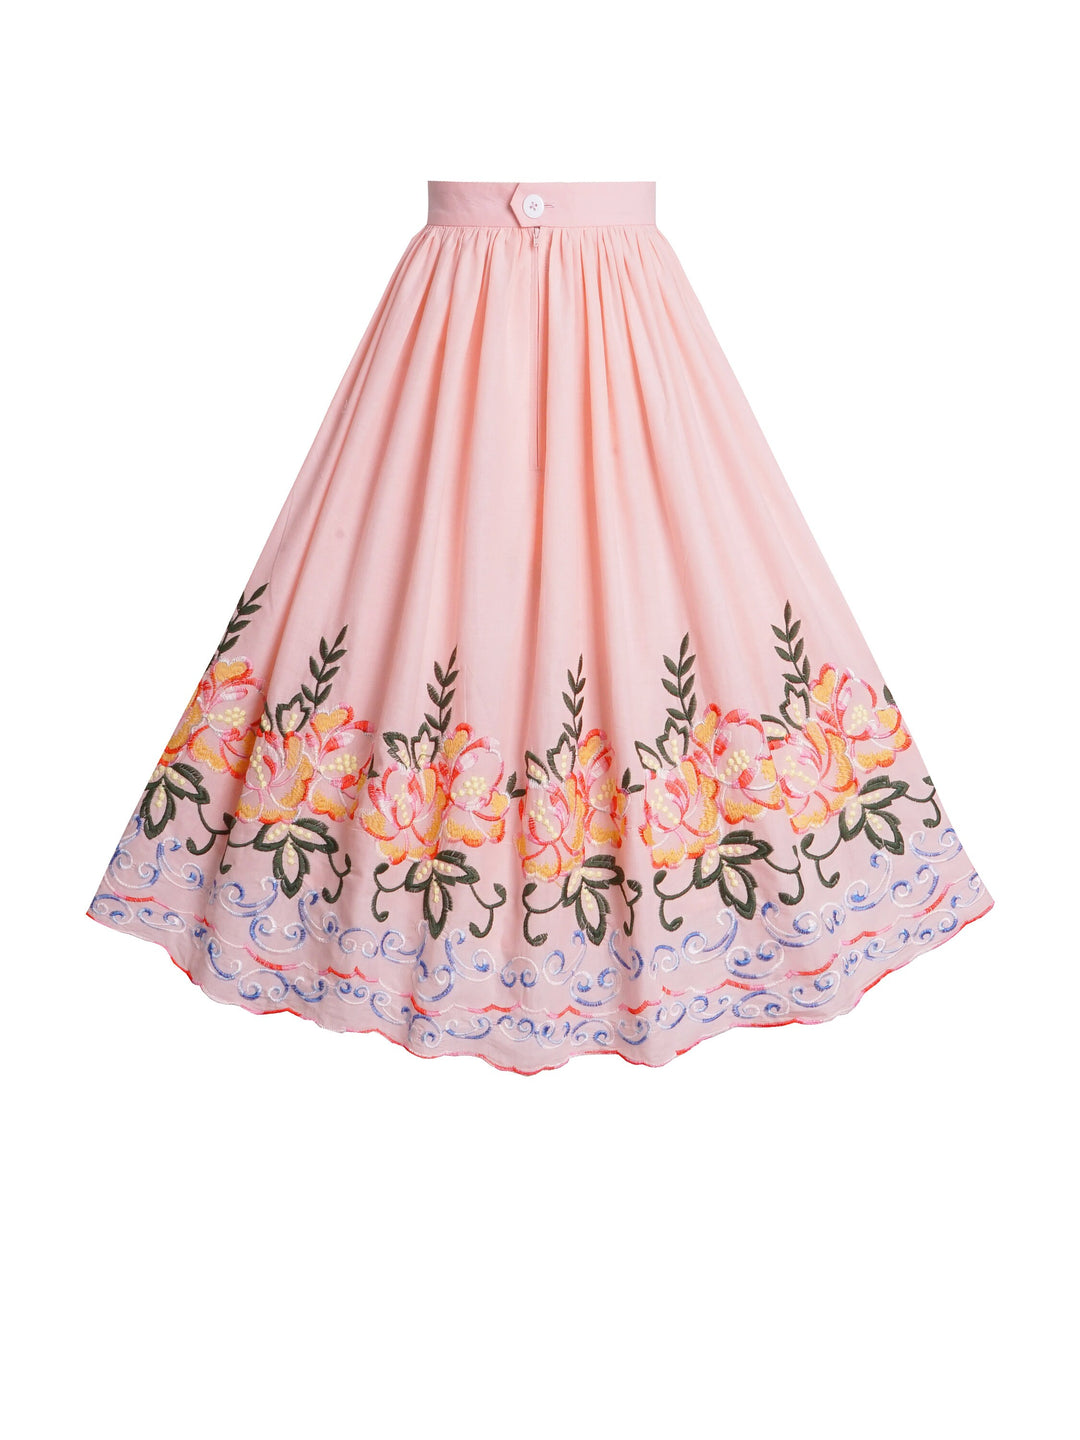 RTS - Size S - Lola Skirt Pink "Garden of your Dreams"